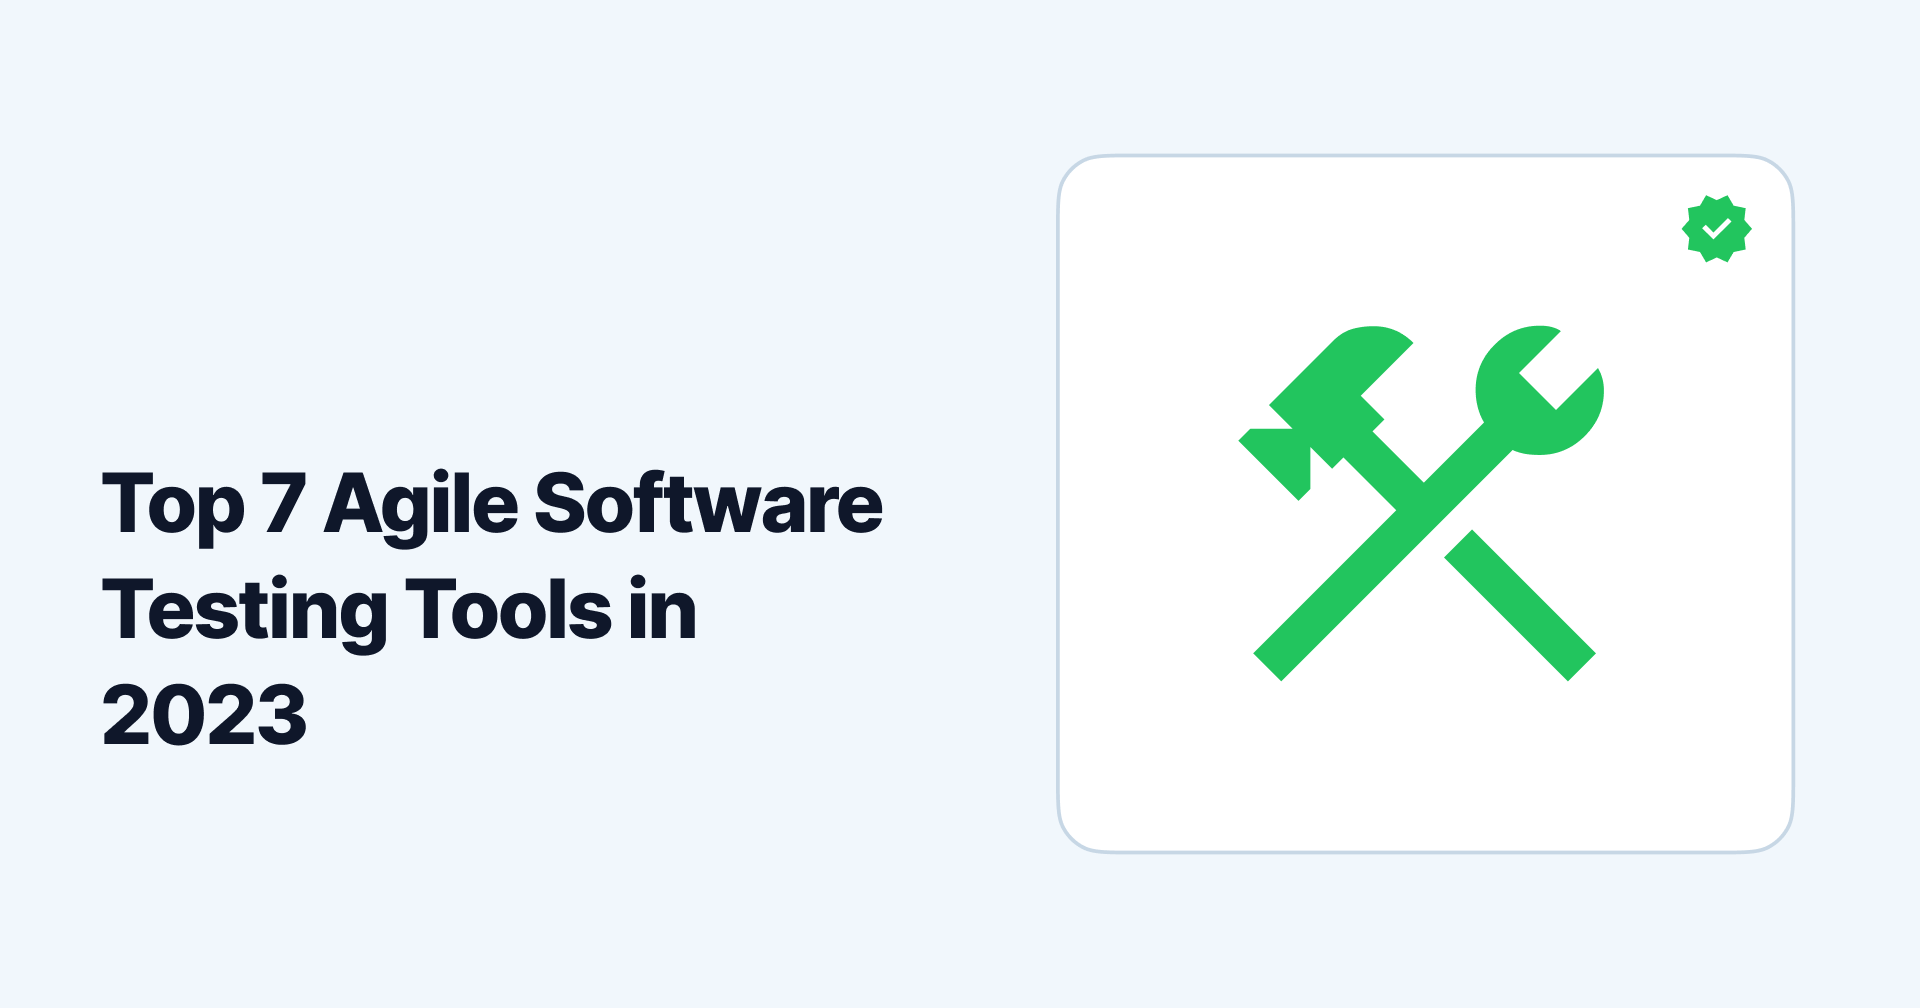 Top 7 Agile Software Testing Tools in 2023